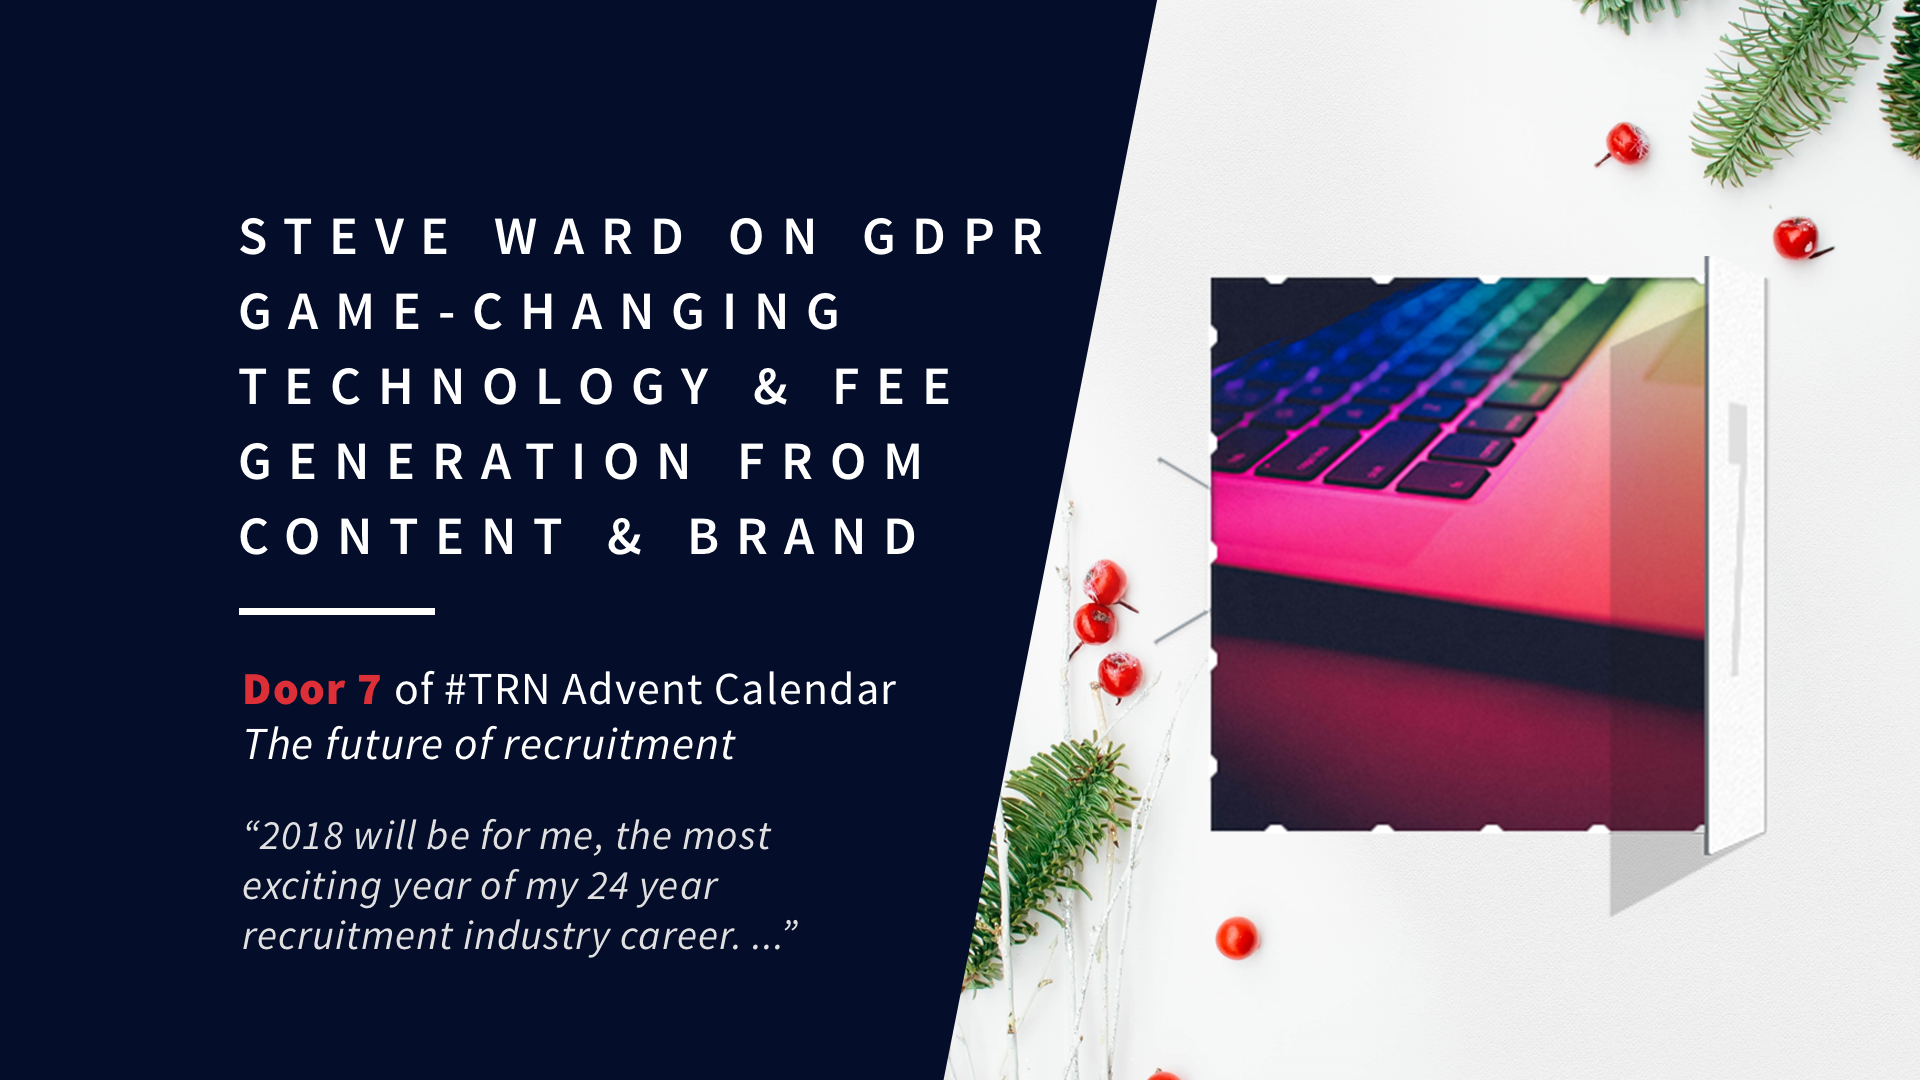 Steve Ward on GDPR, Game-changing Technology & Fee Generation from Content & Brand